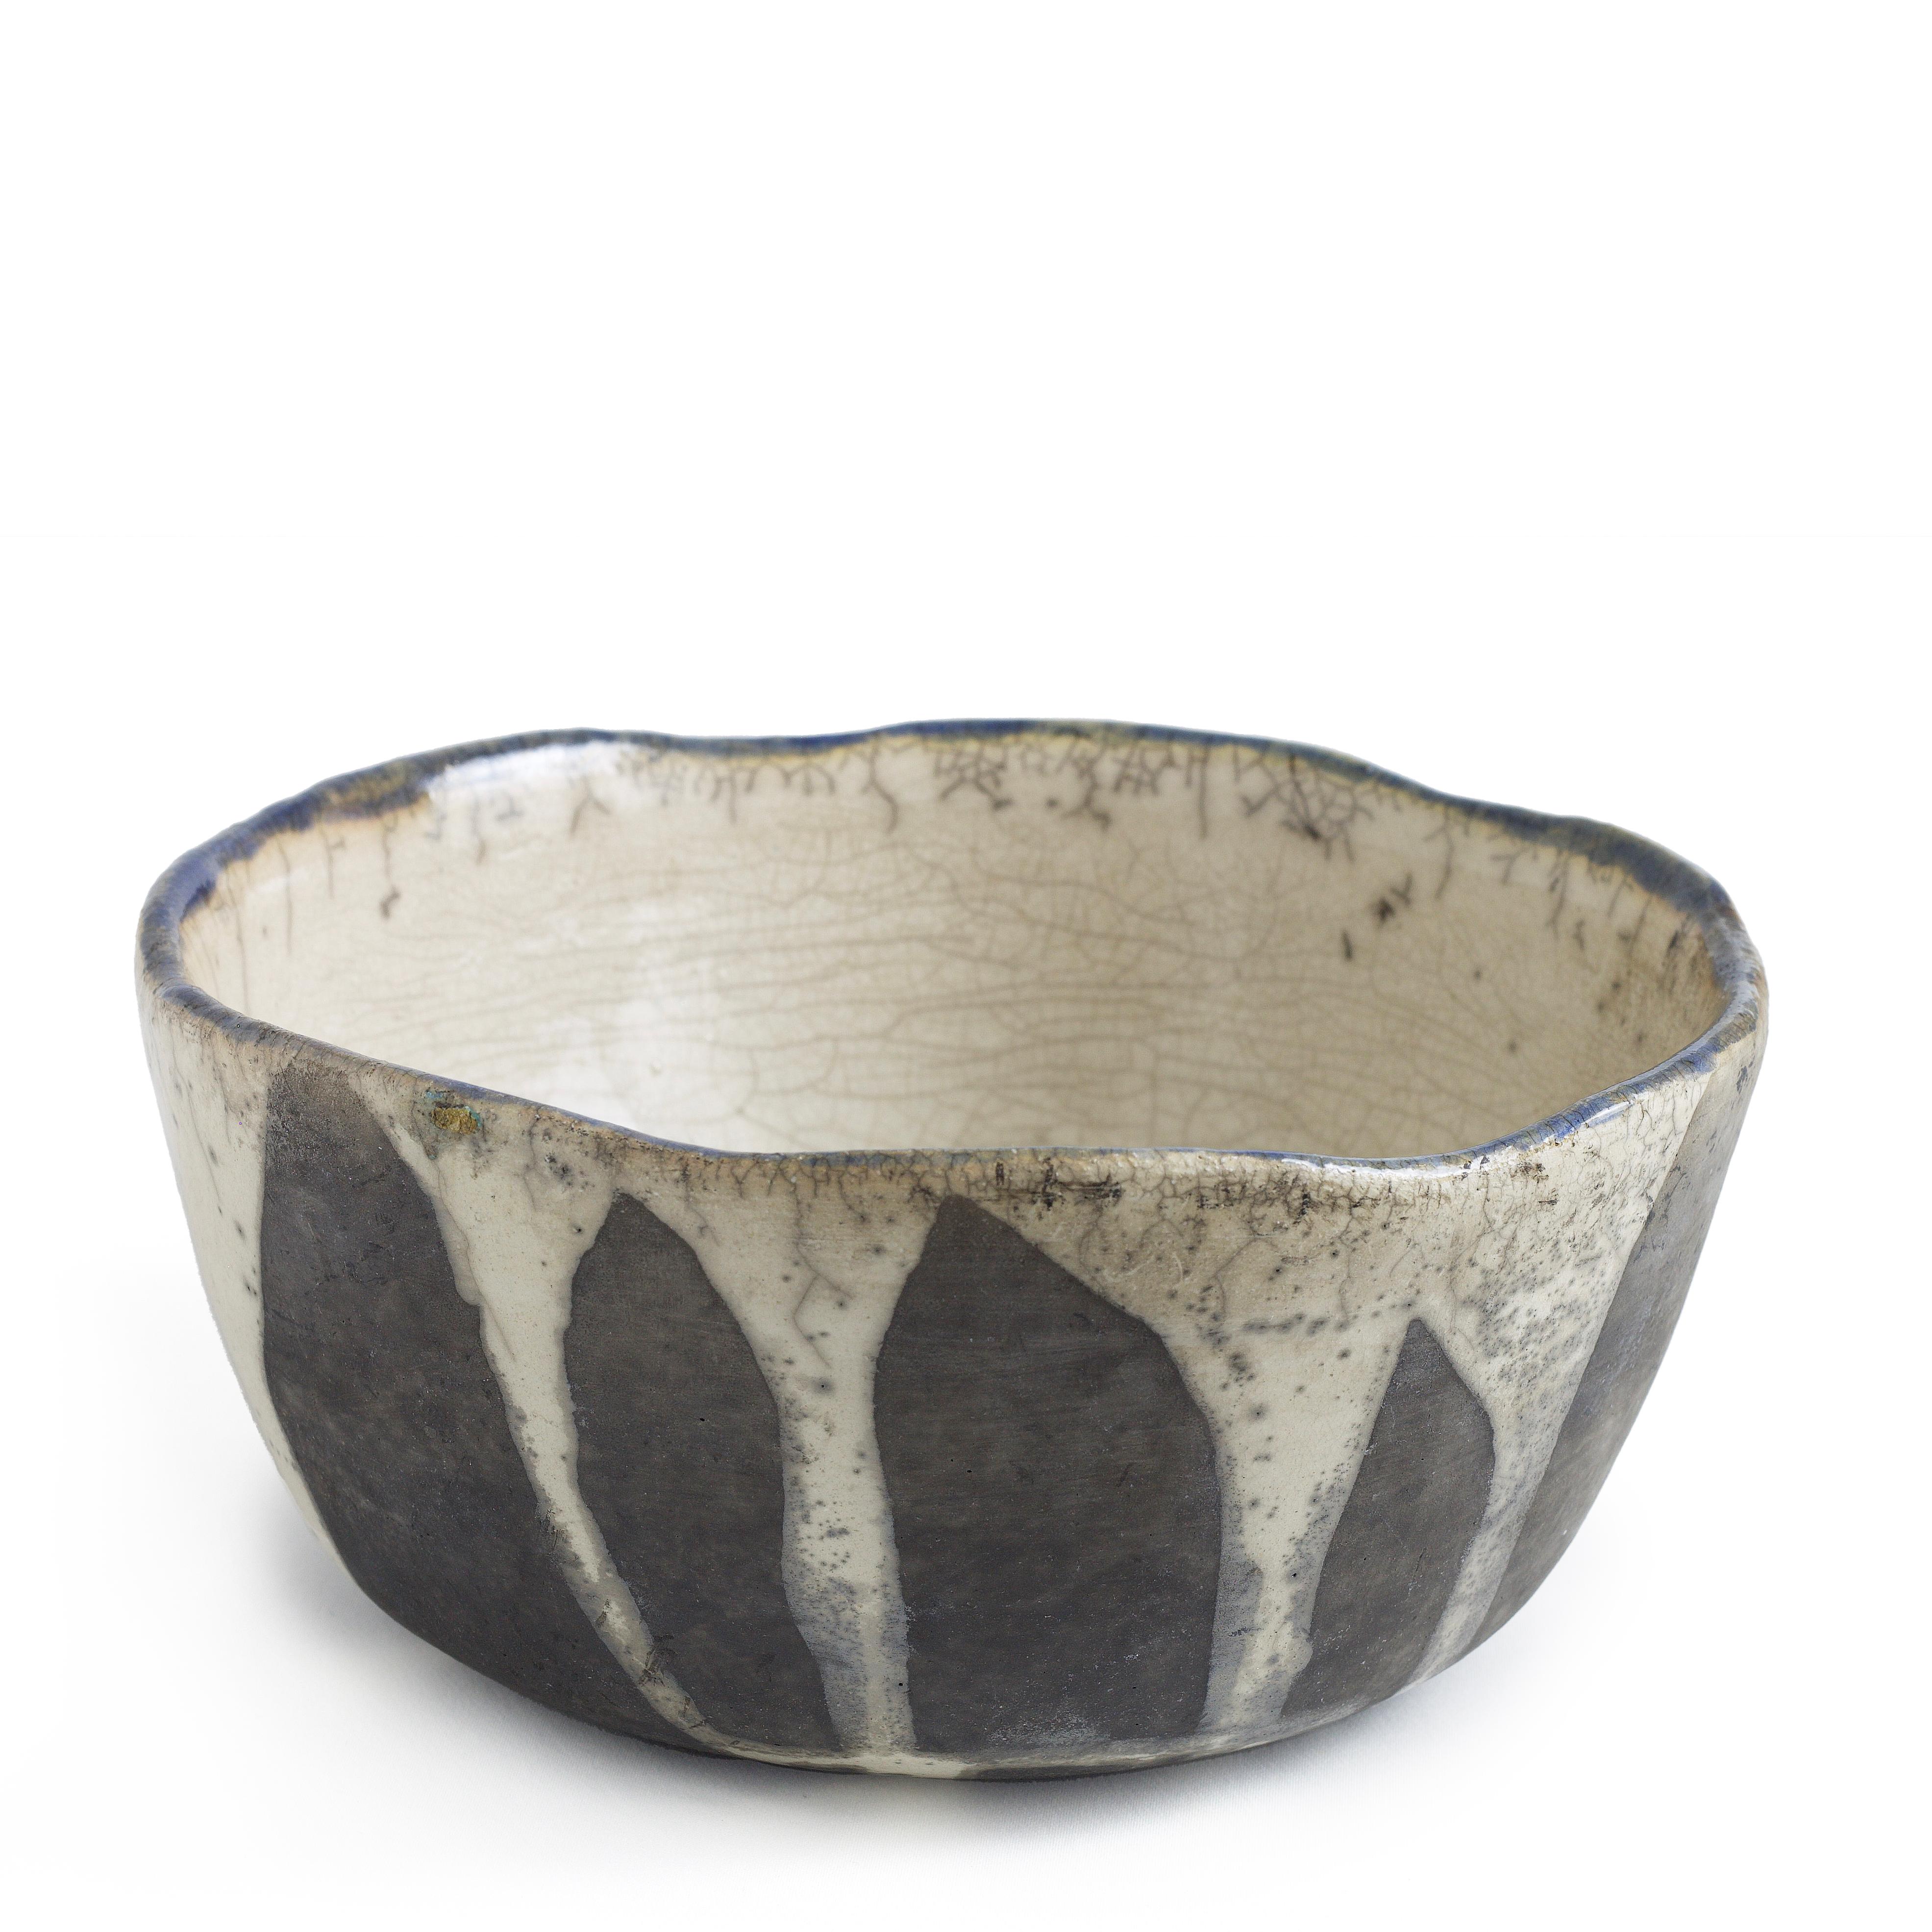 Japanese Tanoa Large Bowl Raku White and Black Ceramic In New Condition For Sale In monza, Monza and Brianza